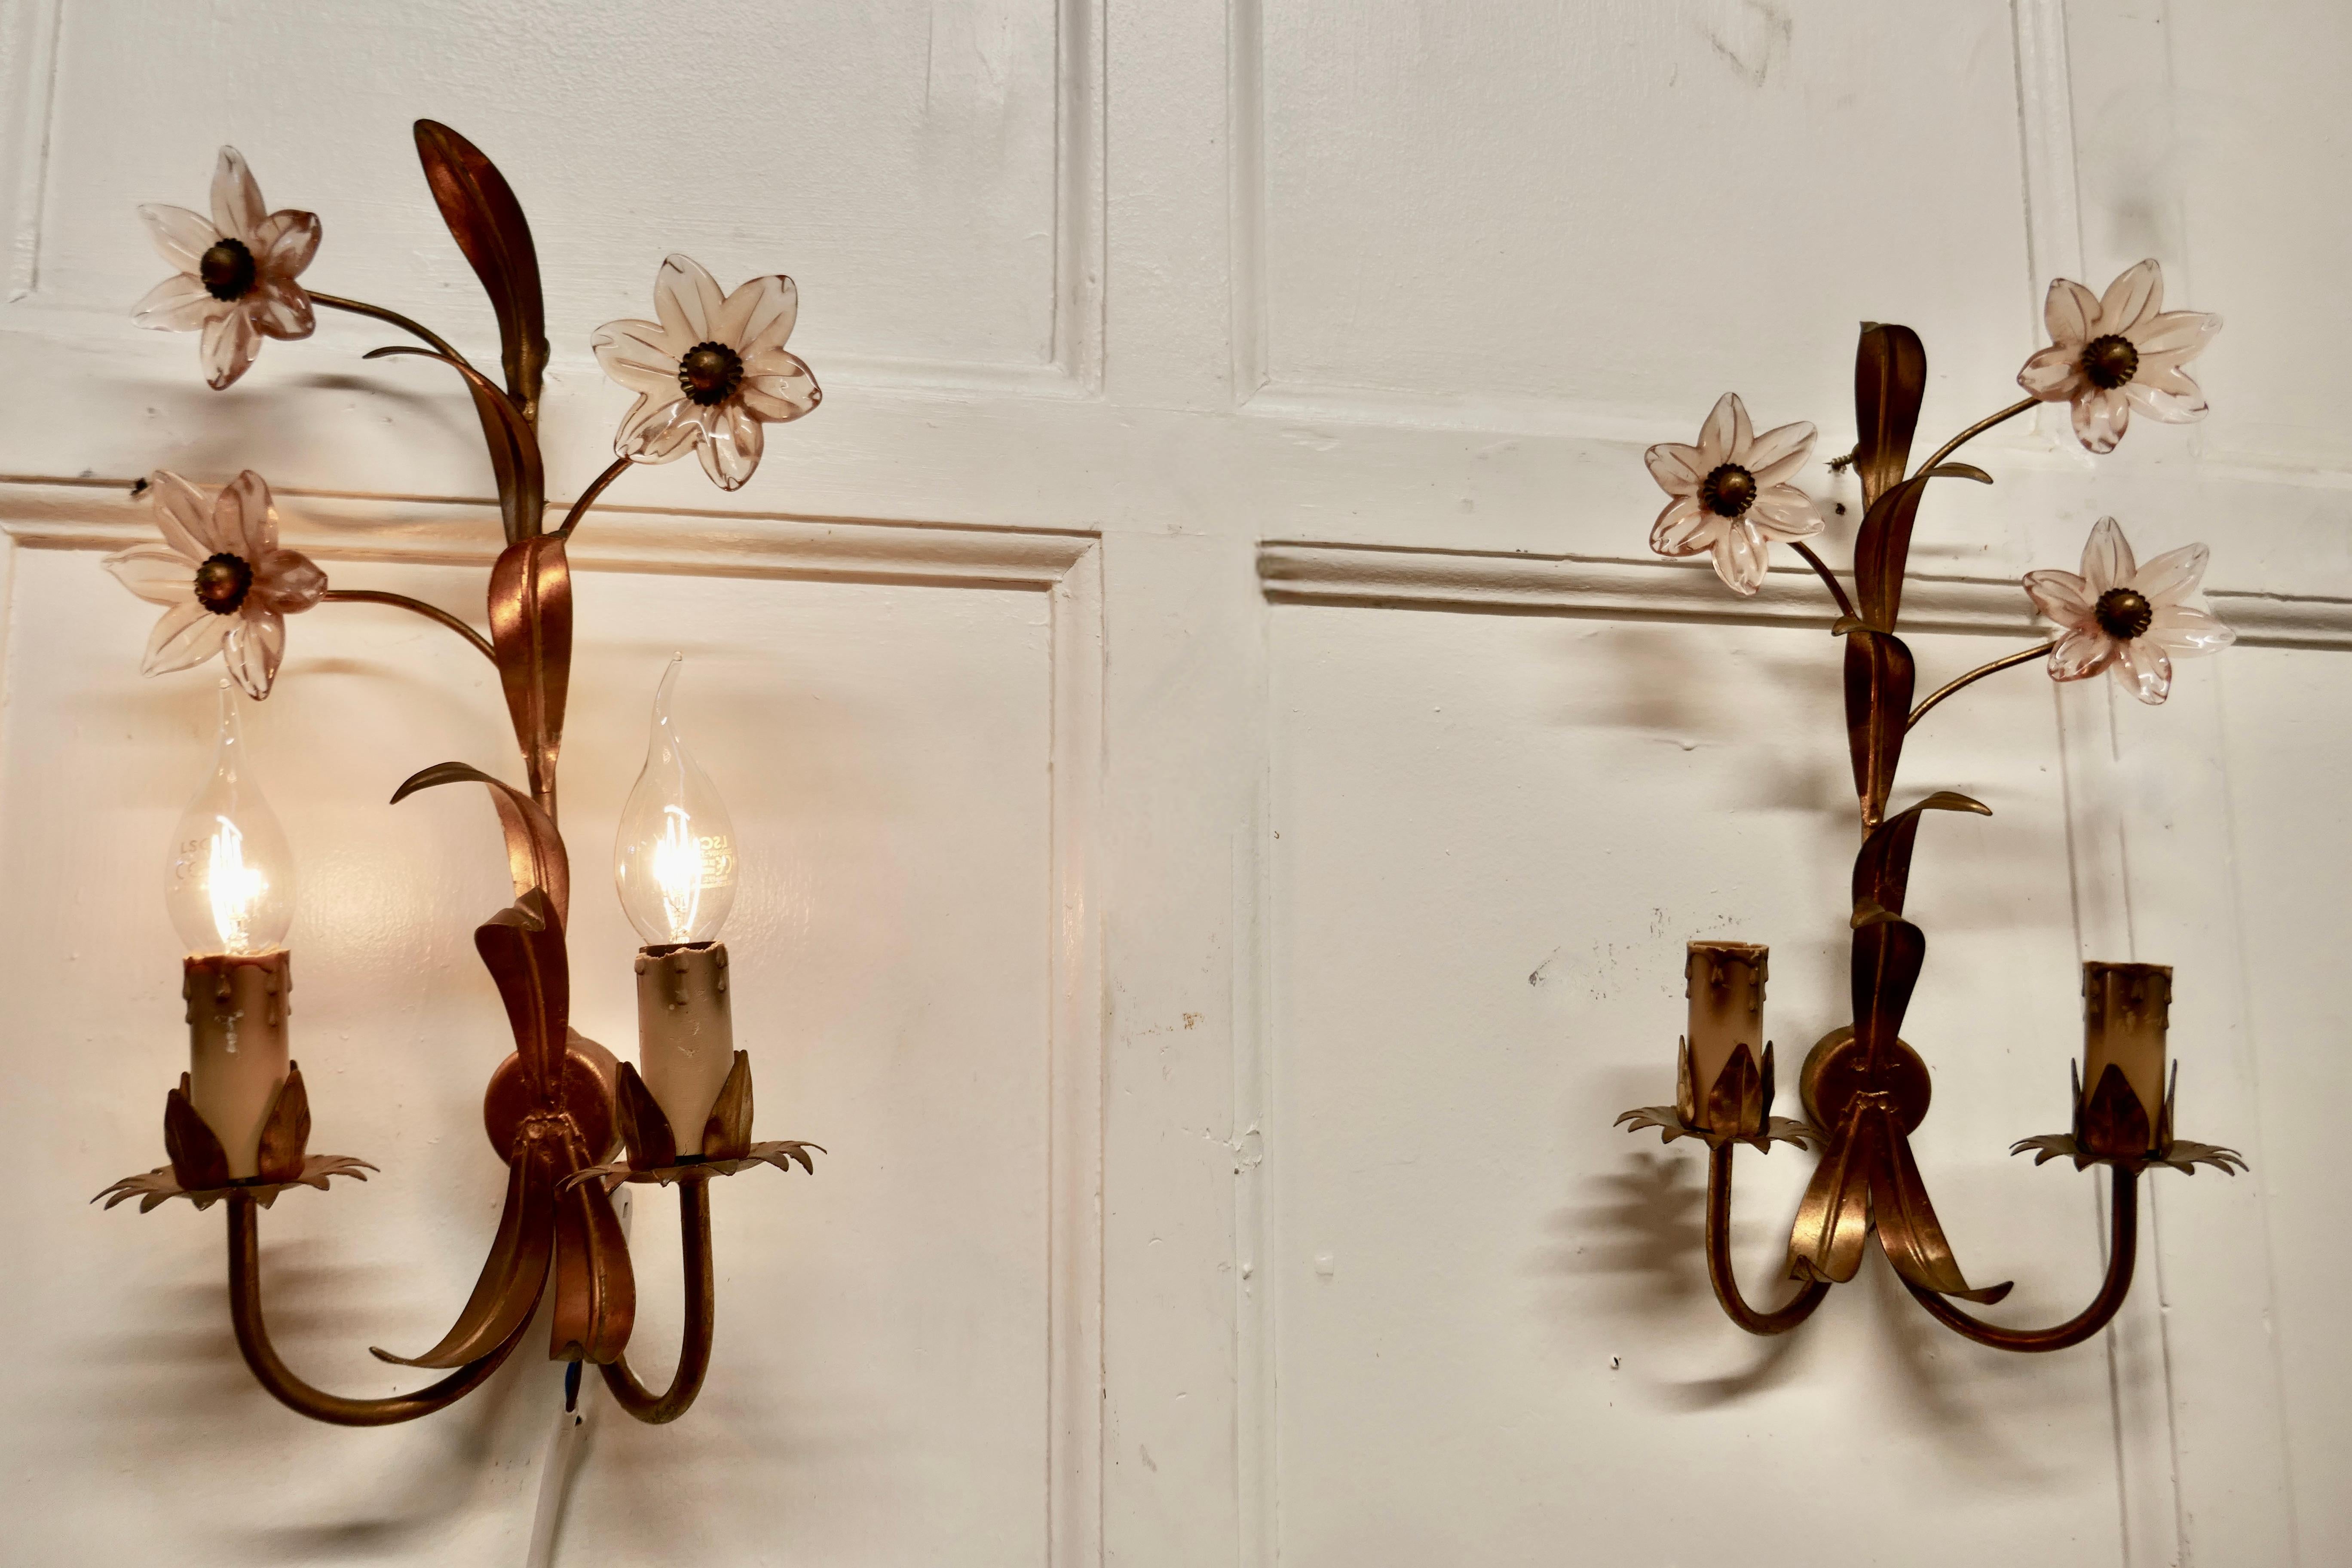 A Pair of French Art Deco Pink Glass and Toleware Gilded Wall Lights

These are a very pretty pair of wall lights, they each have 2 toleware sconces and curled gilt leaves which are decorated with delicate pink glass daisies 
The lights are